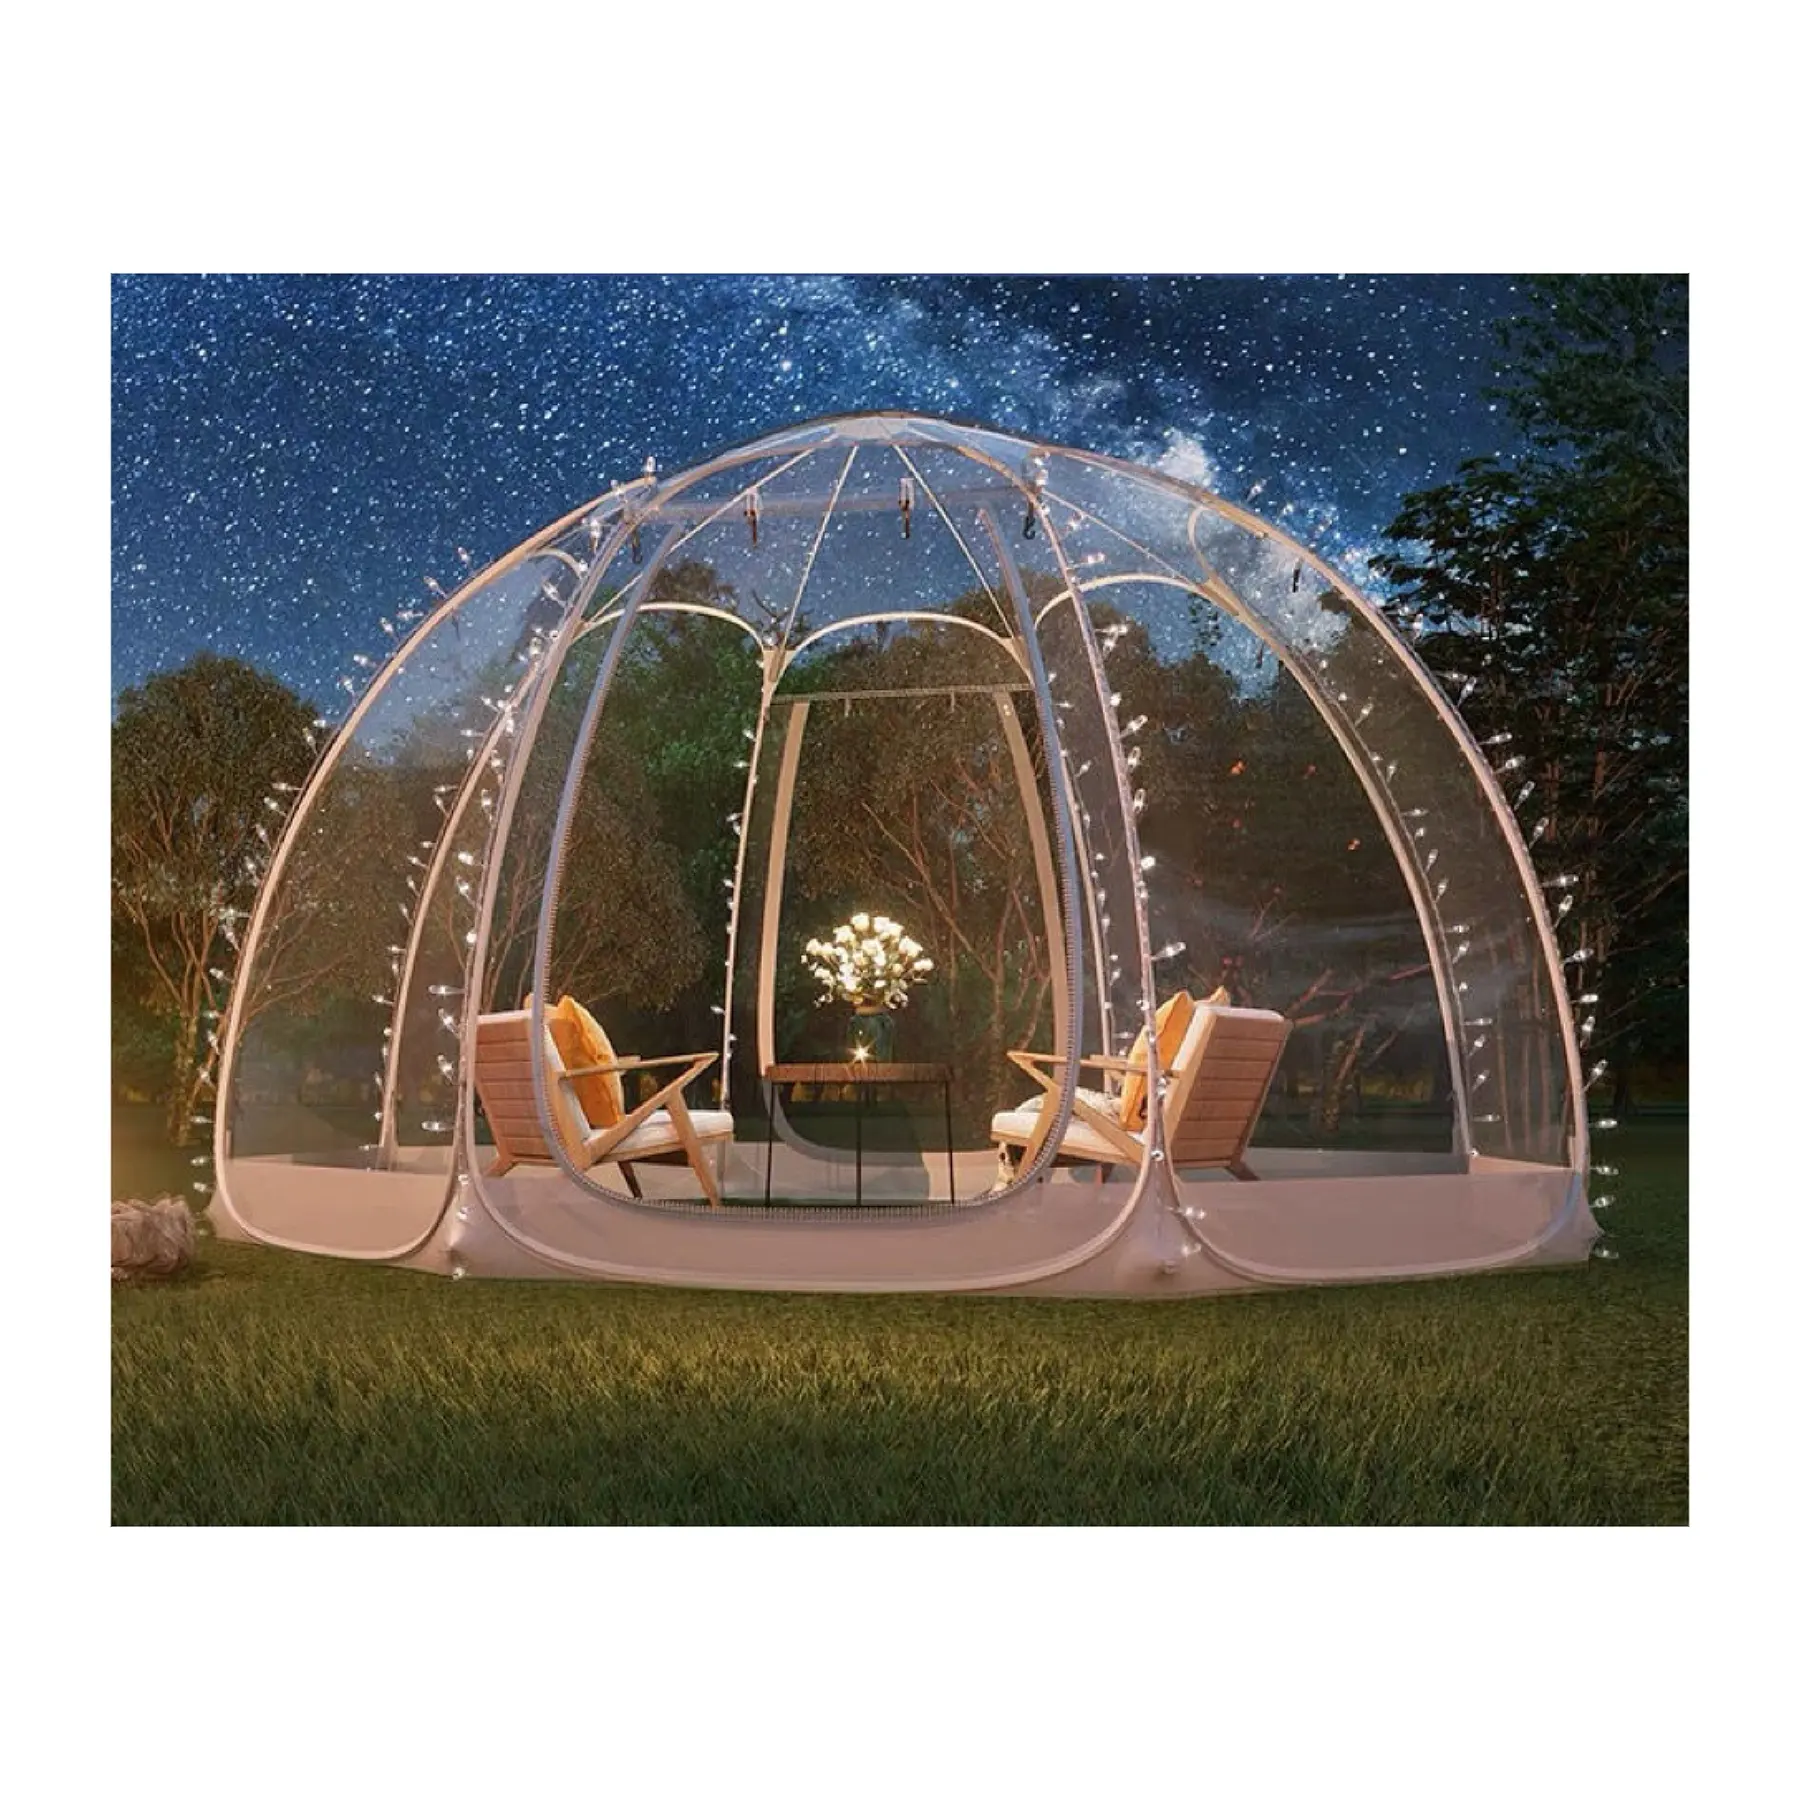 Hot Sale Outside Globe Clear Bubble Dome Igloo Tent Family Tents Camping Outdoor Waterproof Large Tent